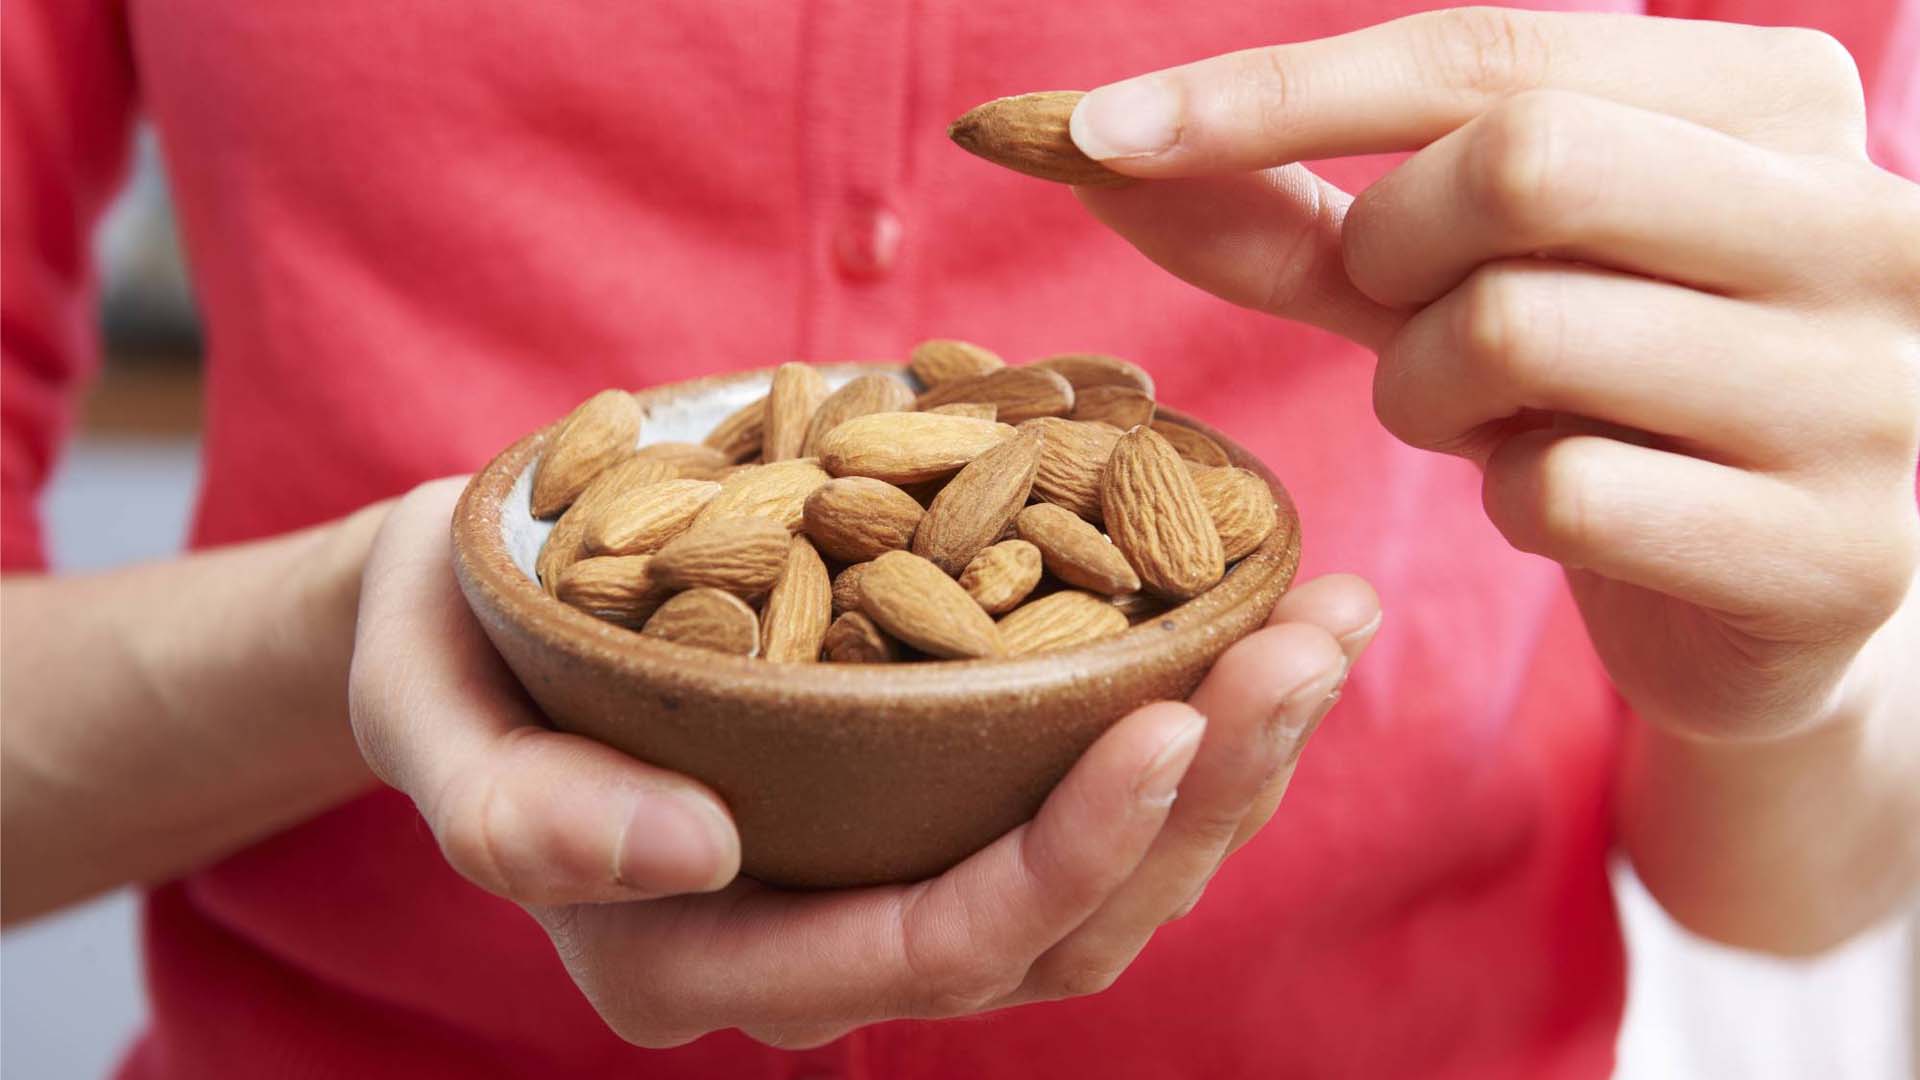 A woman picking up an almond from a bowl of almonds